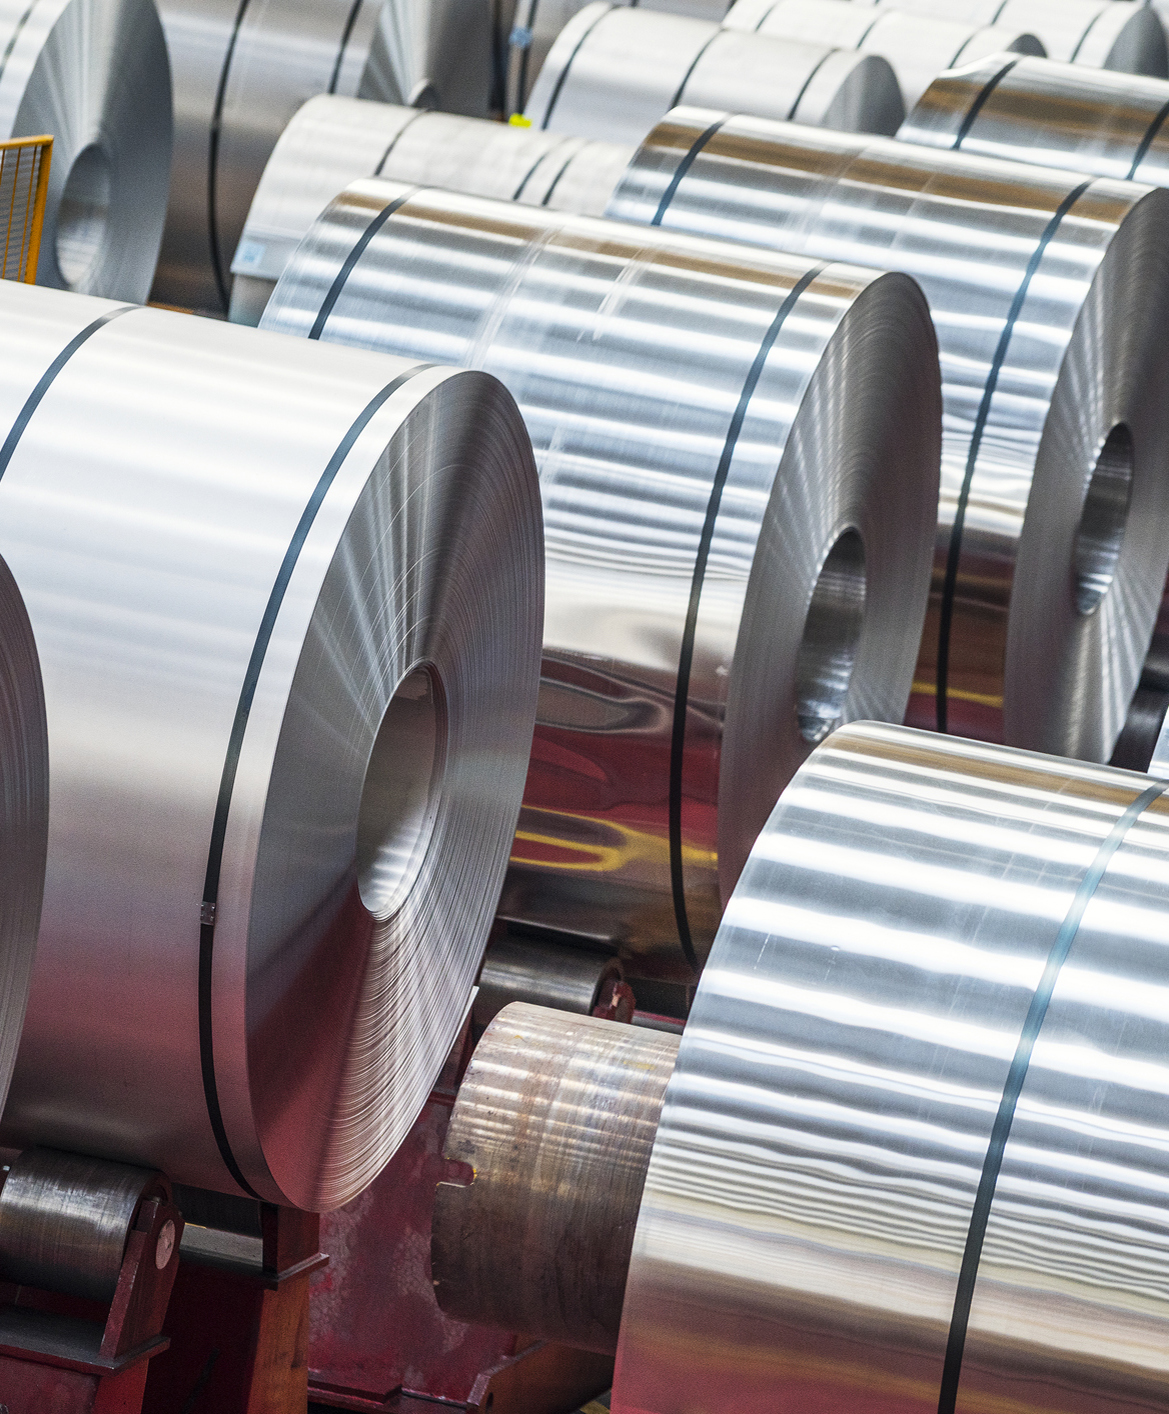 American Primary Aluminum Producers Launch Official Association to Protect Long-Term Interest of Industry